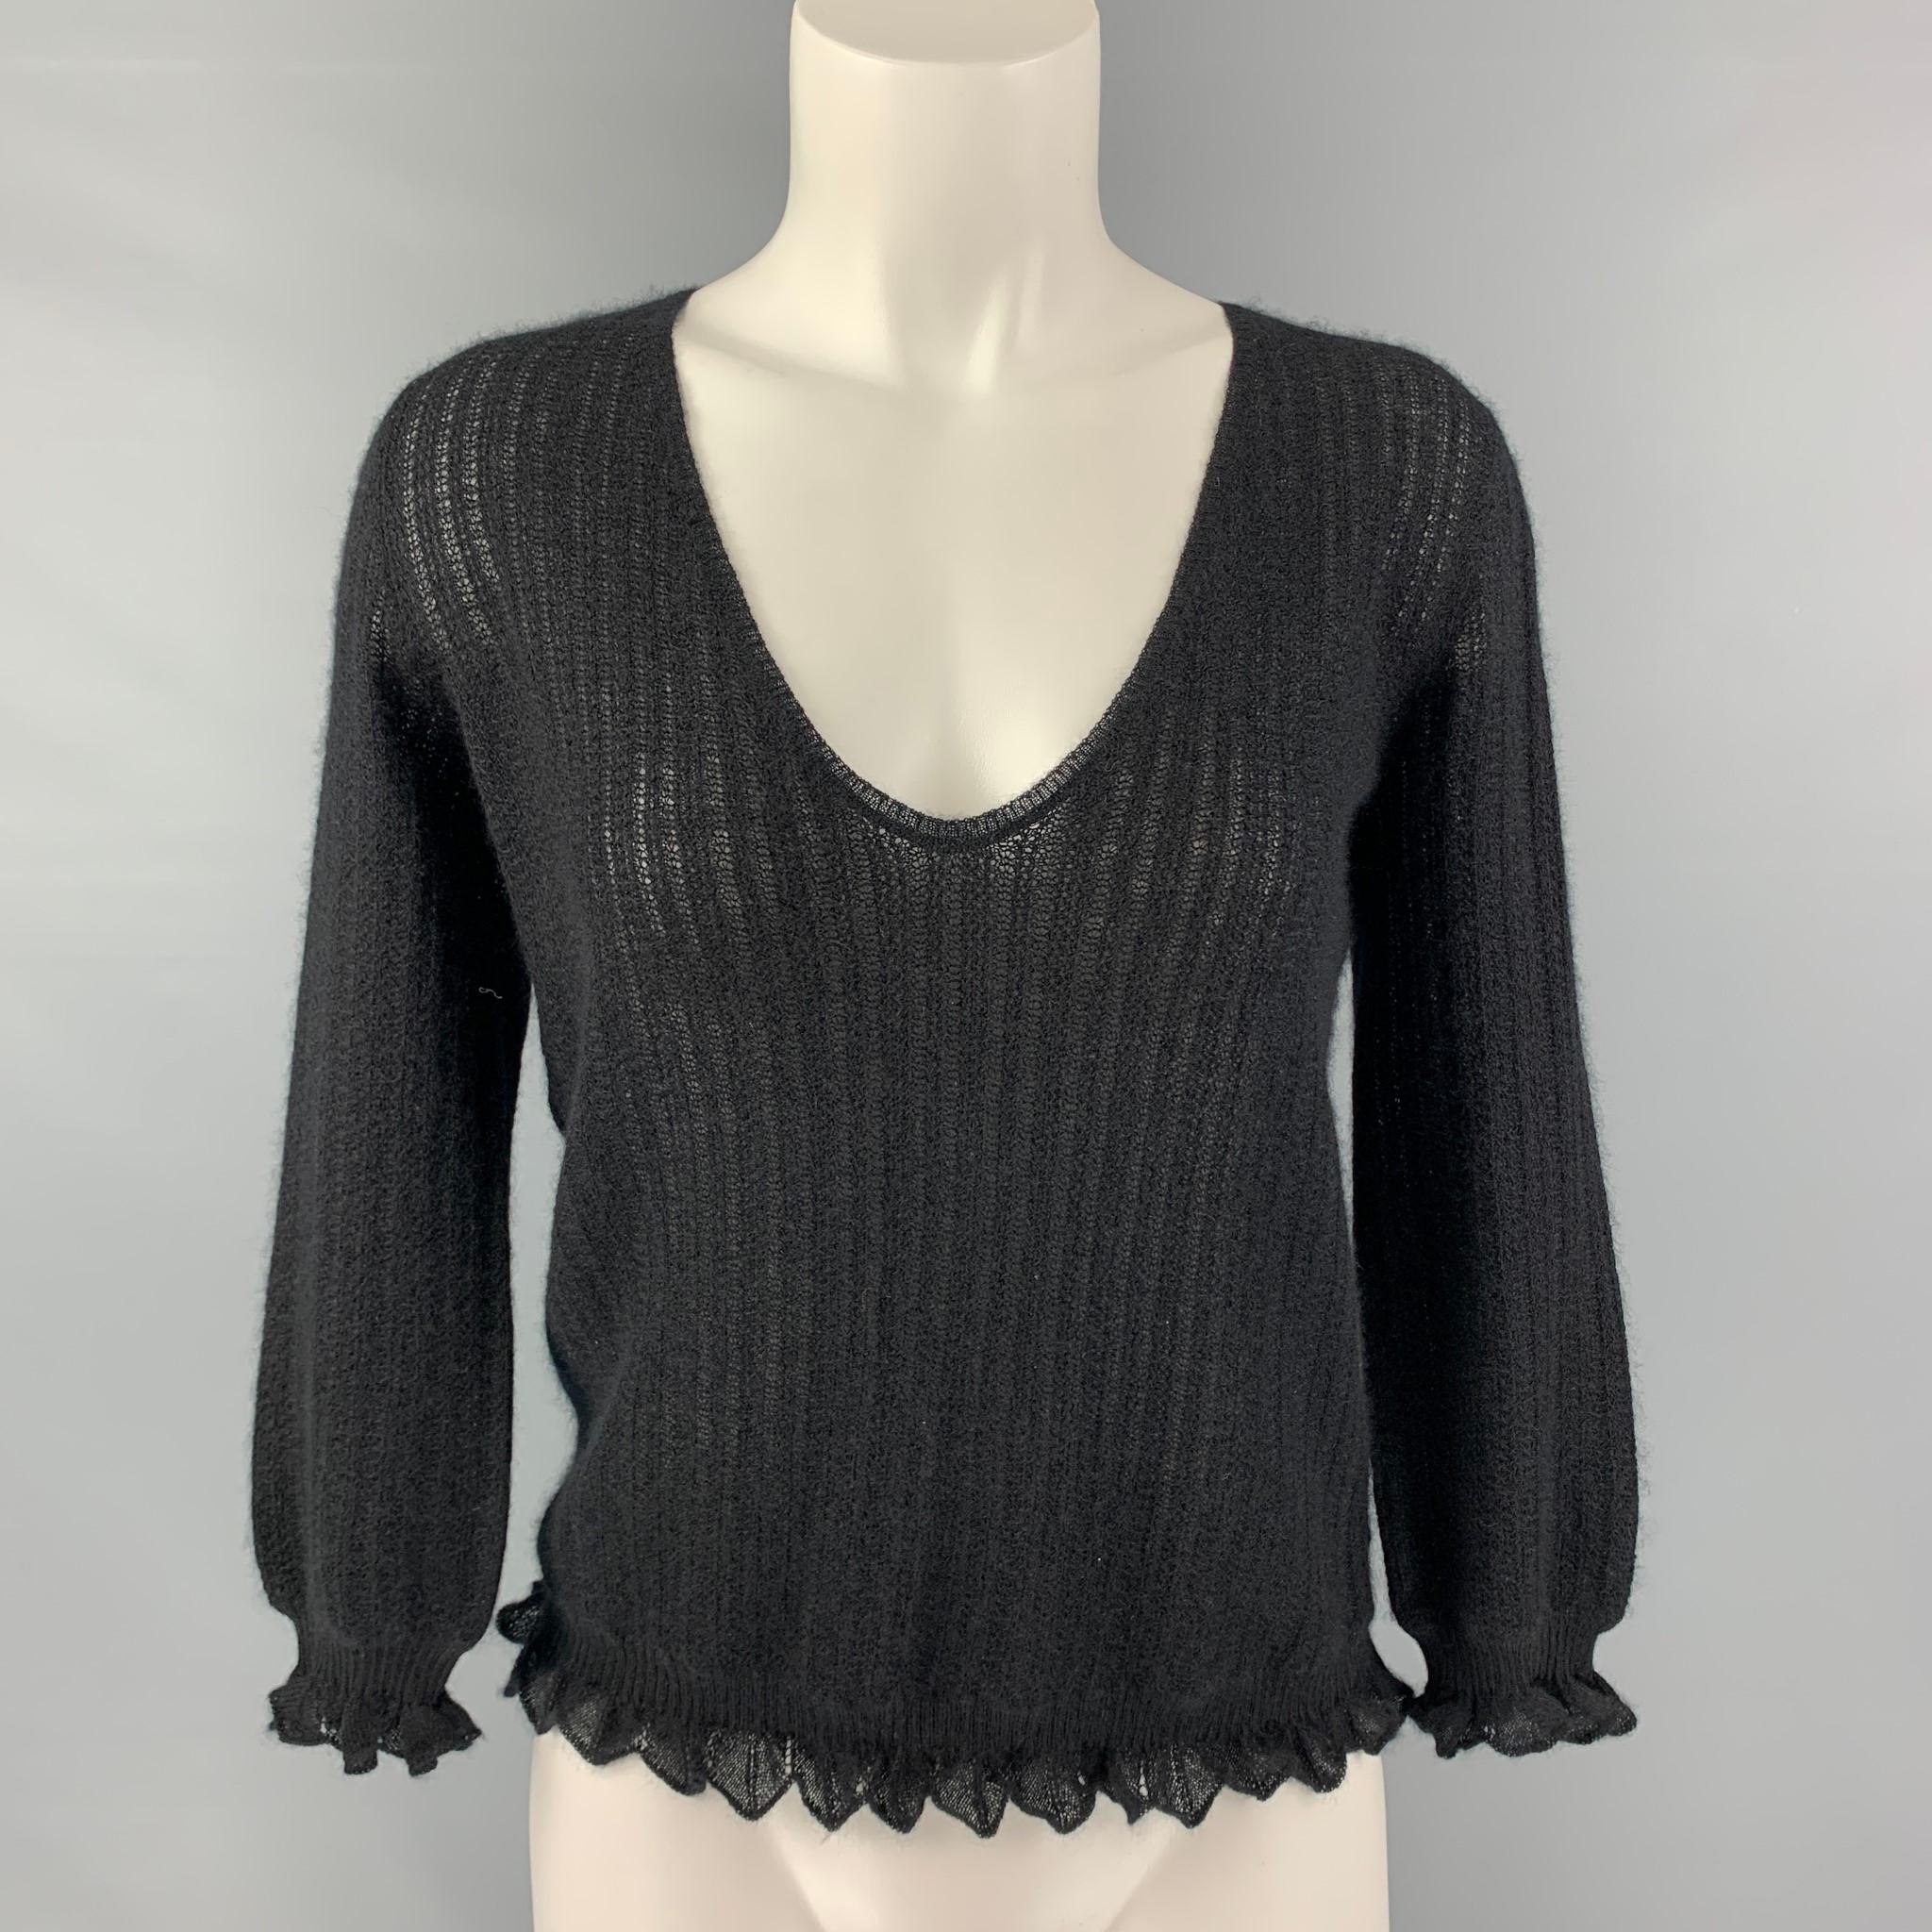 LOUIS VUITTON 3/4 sleeves sweater comes in a black cashmere knit fabric featuring v-neck, and ruffled detail at sleeves and bottom hem. Made in Italy.

Good Pre-Owned Condition. Minor Sign of Wear.
Marked: M

Measurements:

Shoulder: 14 in
Bust: 38